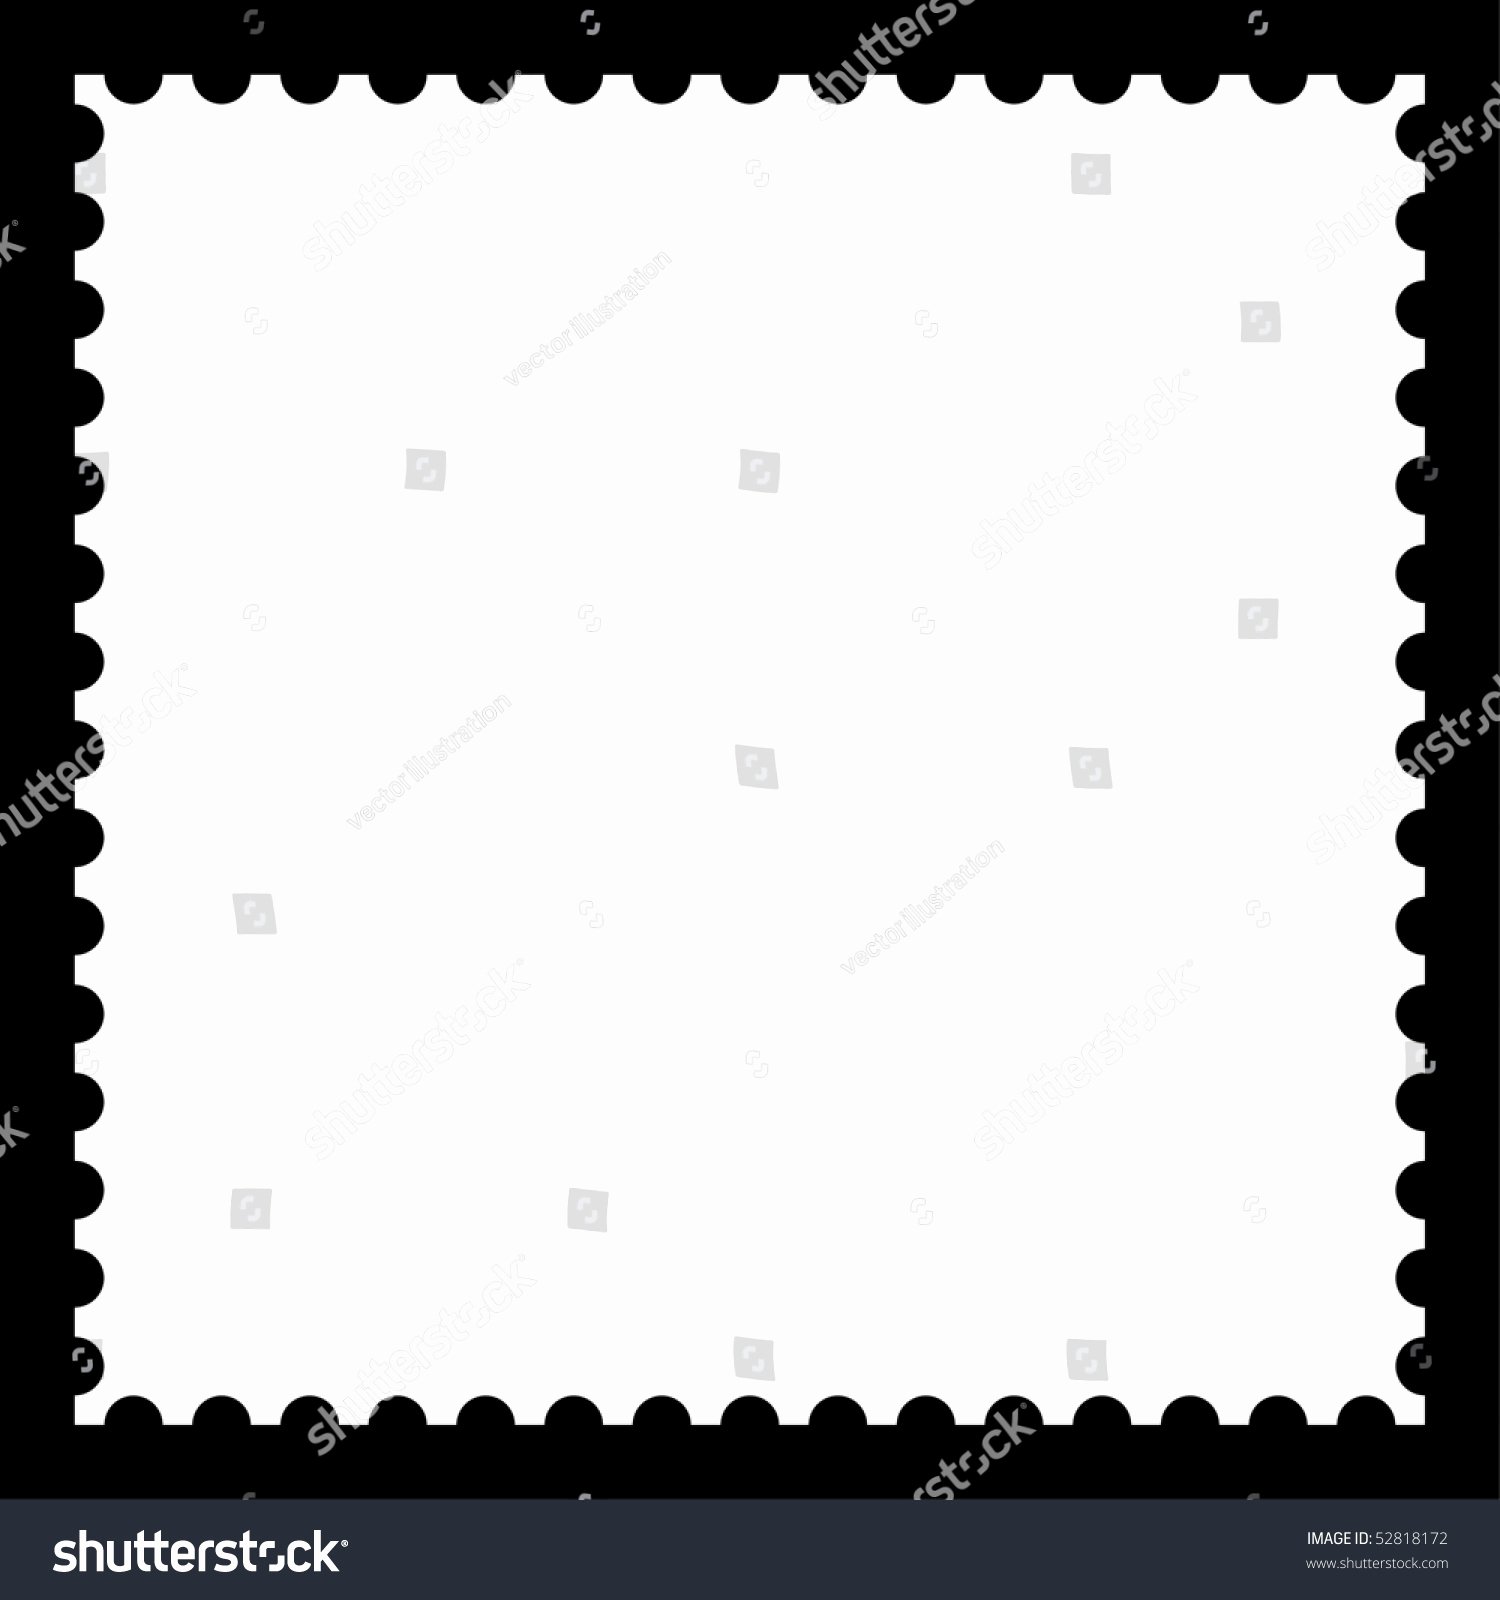 Blank Stamp Template Fresh Matted White Blank Postage Stamp Shadow Stock Vector